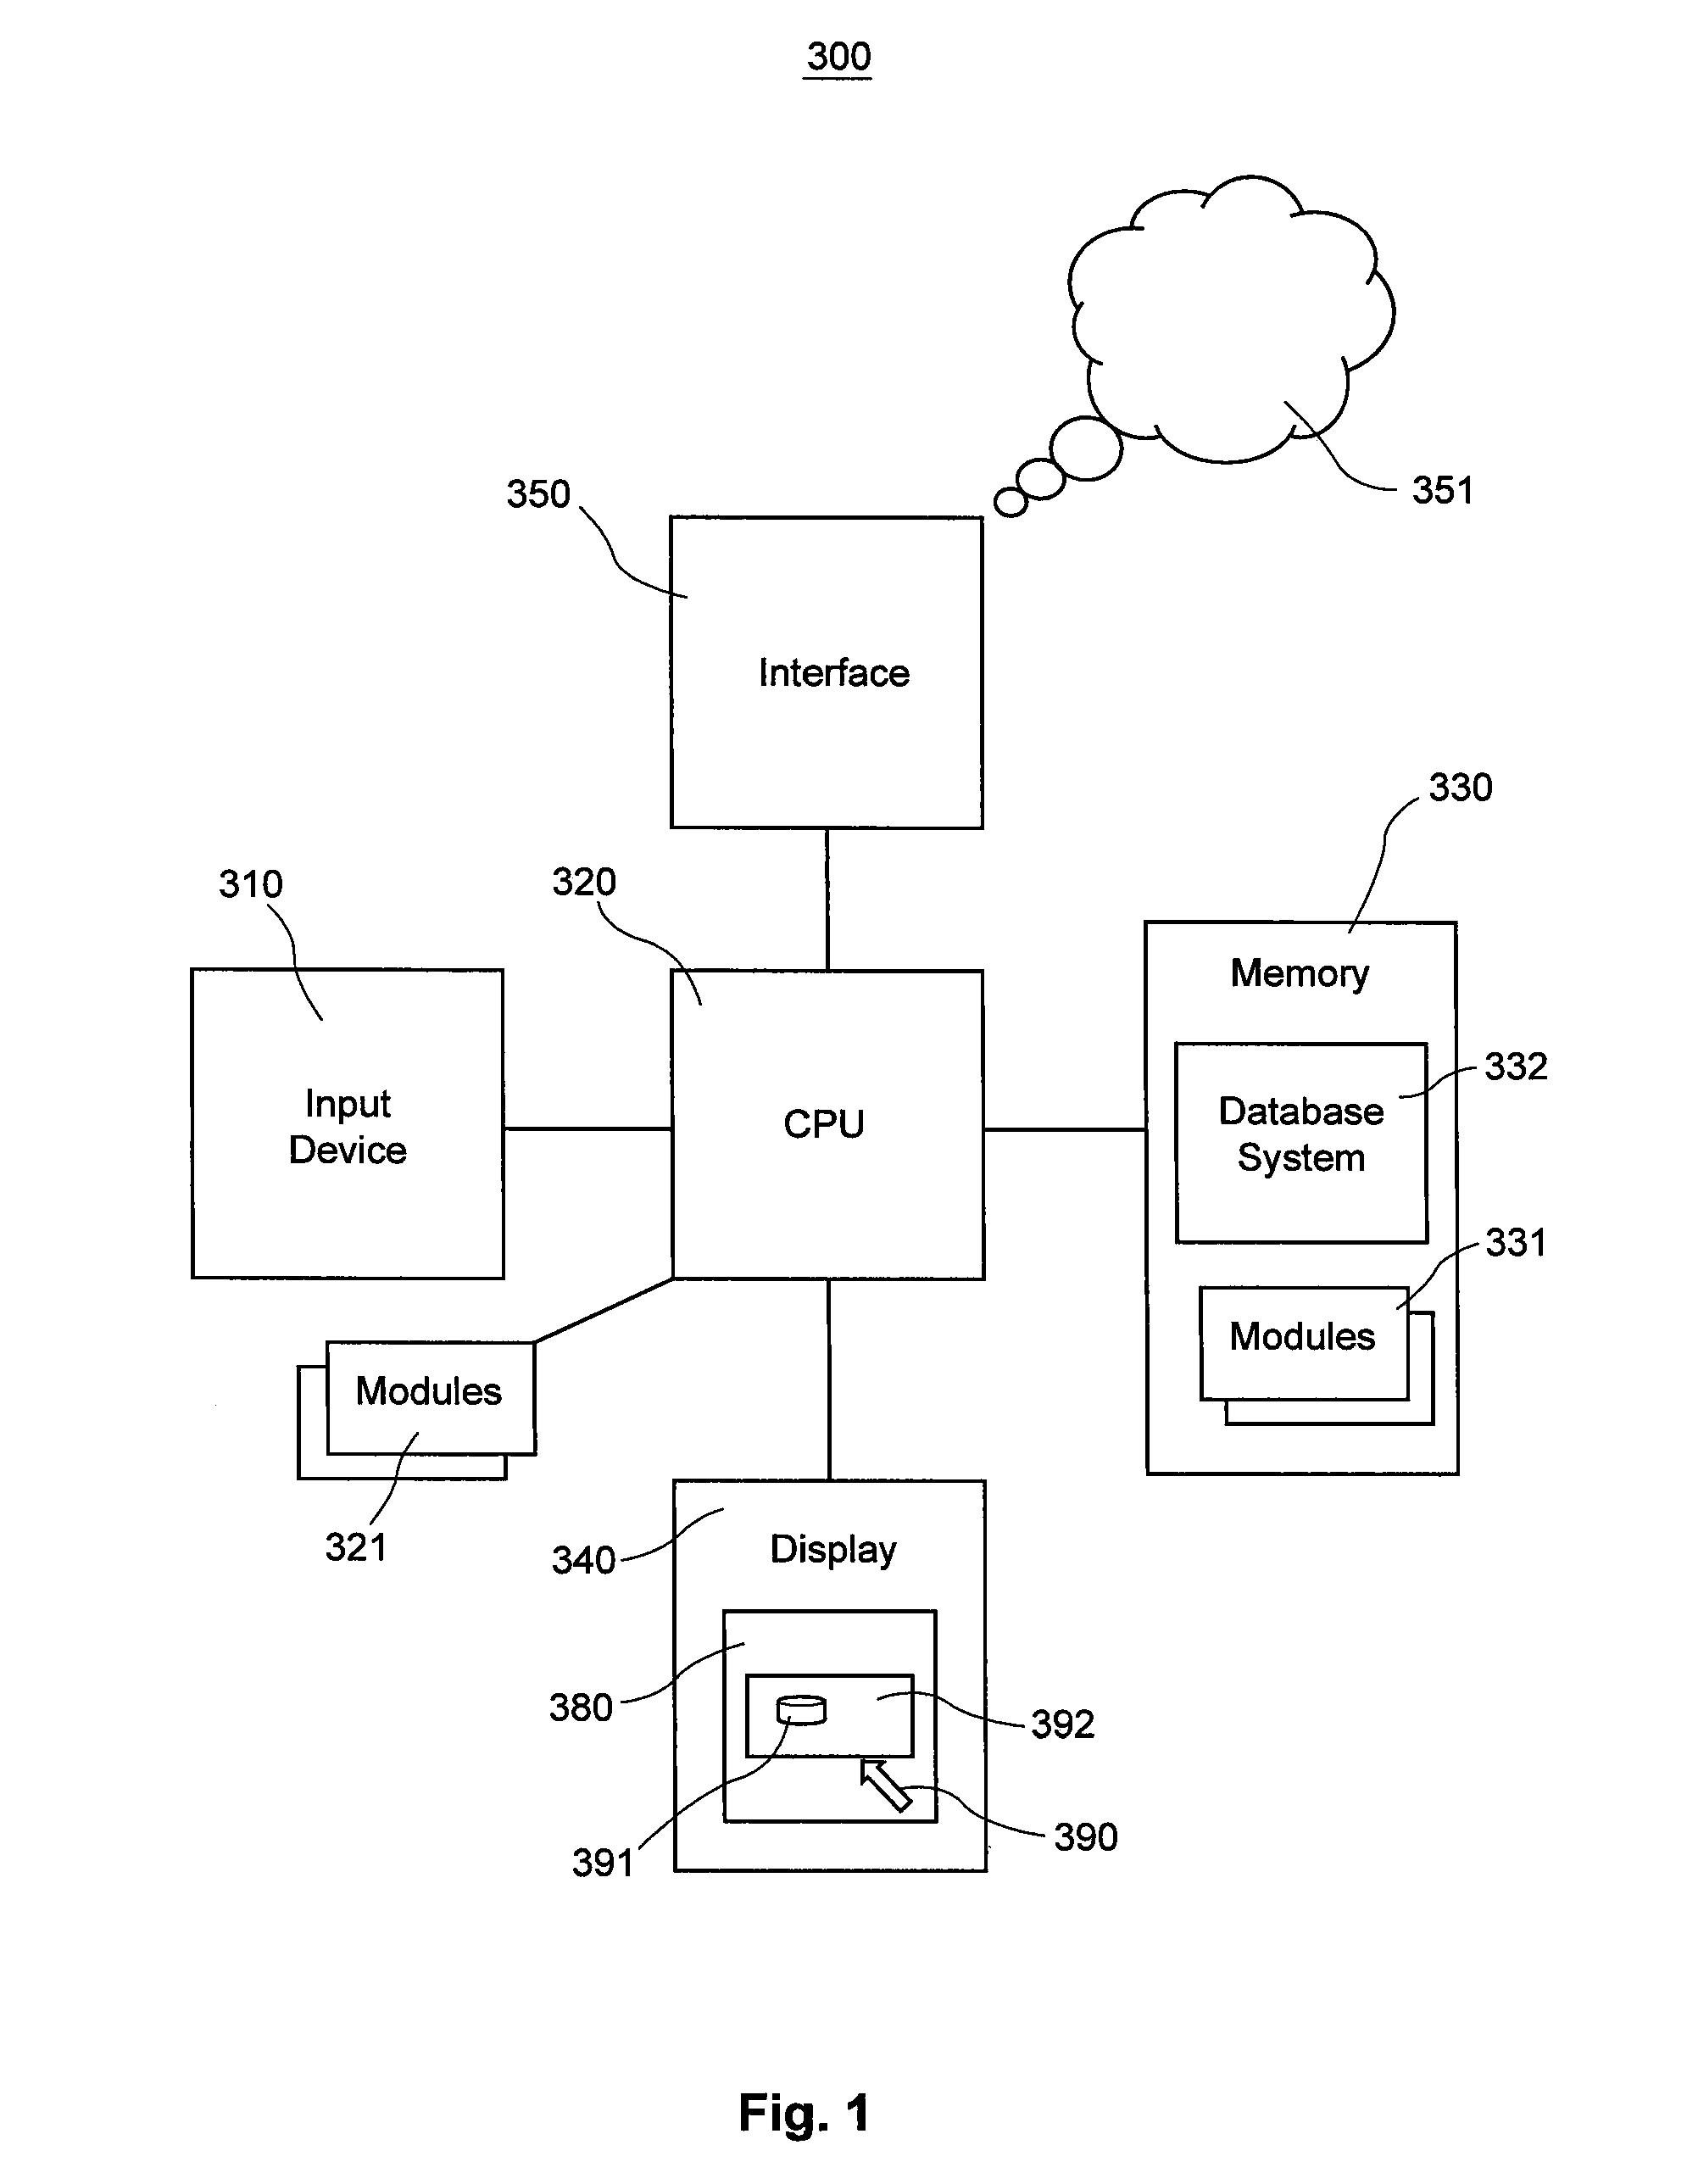 Method and system for providing visual instructions to warehouse operators